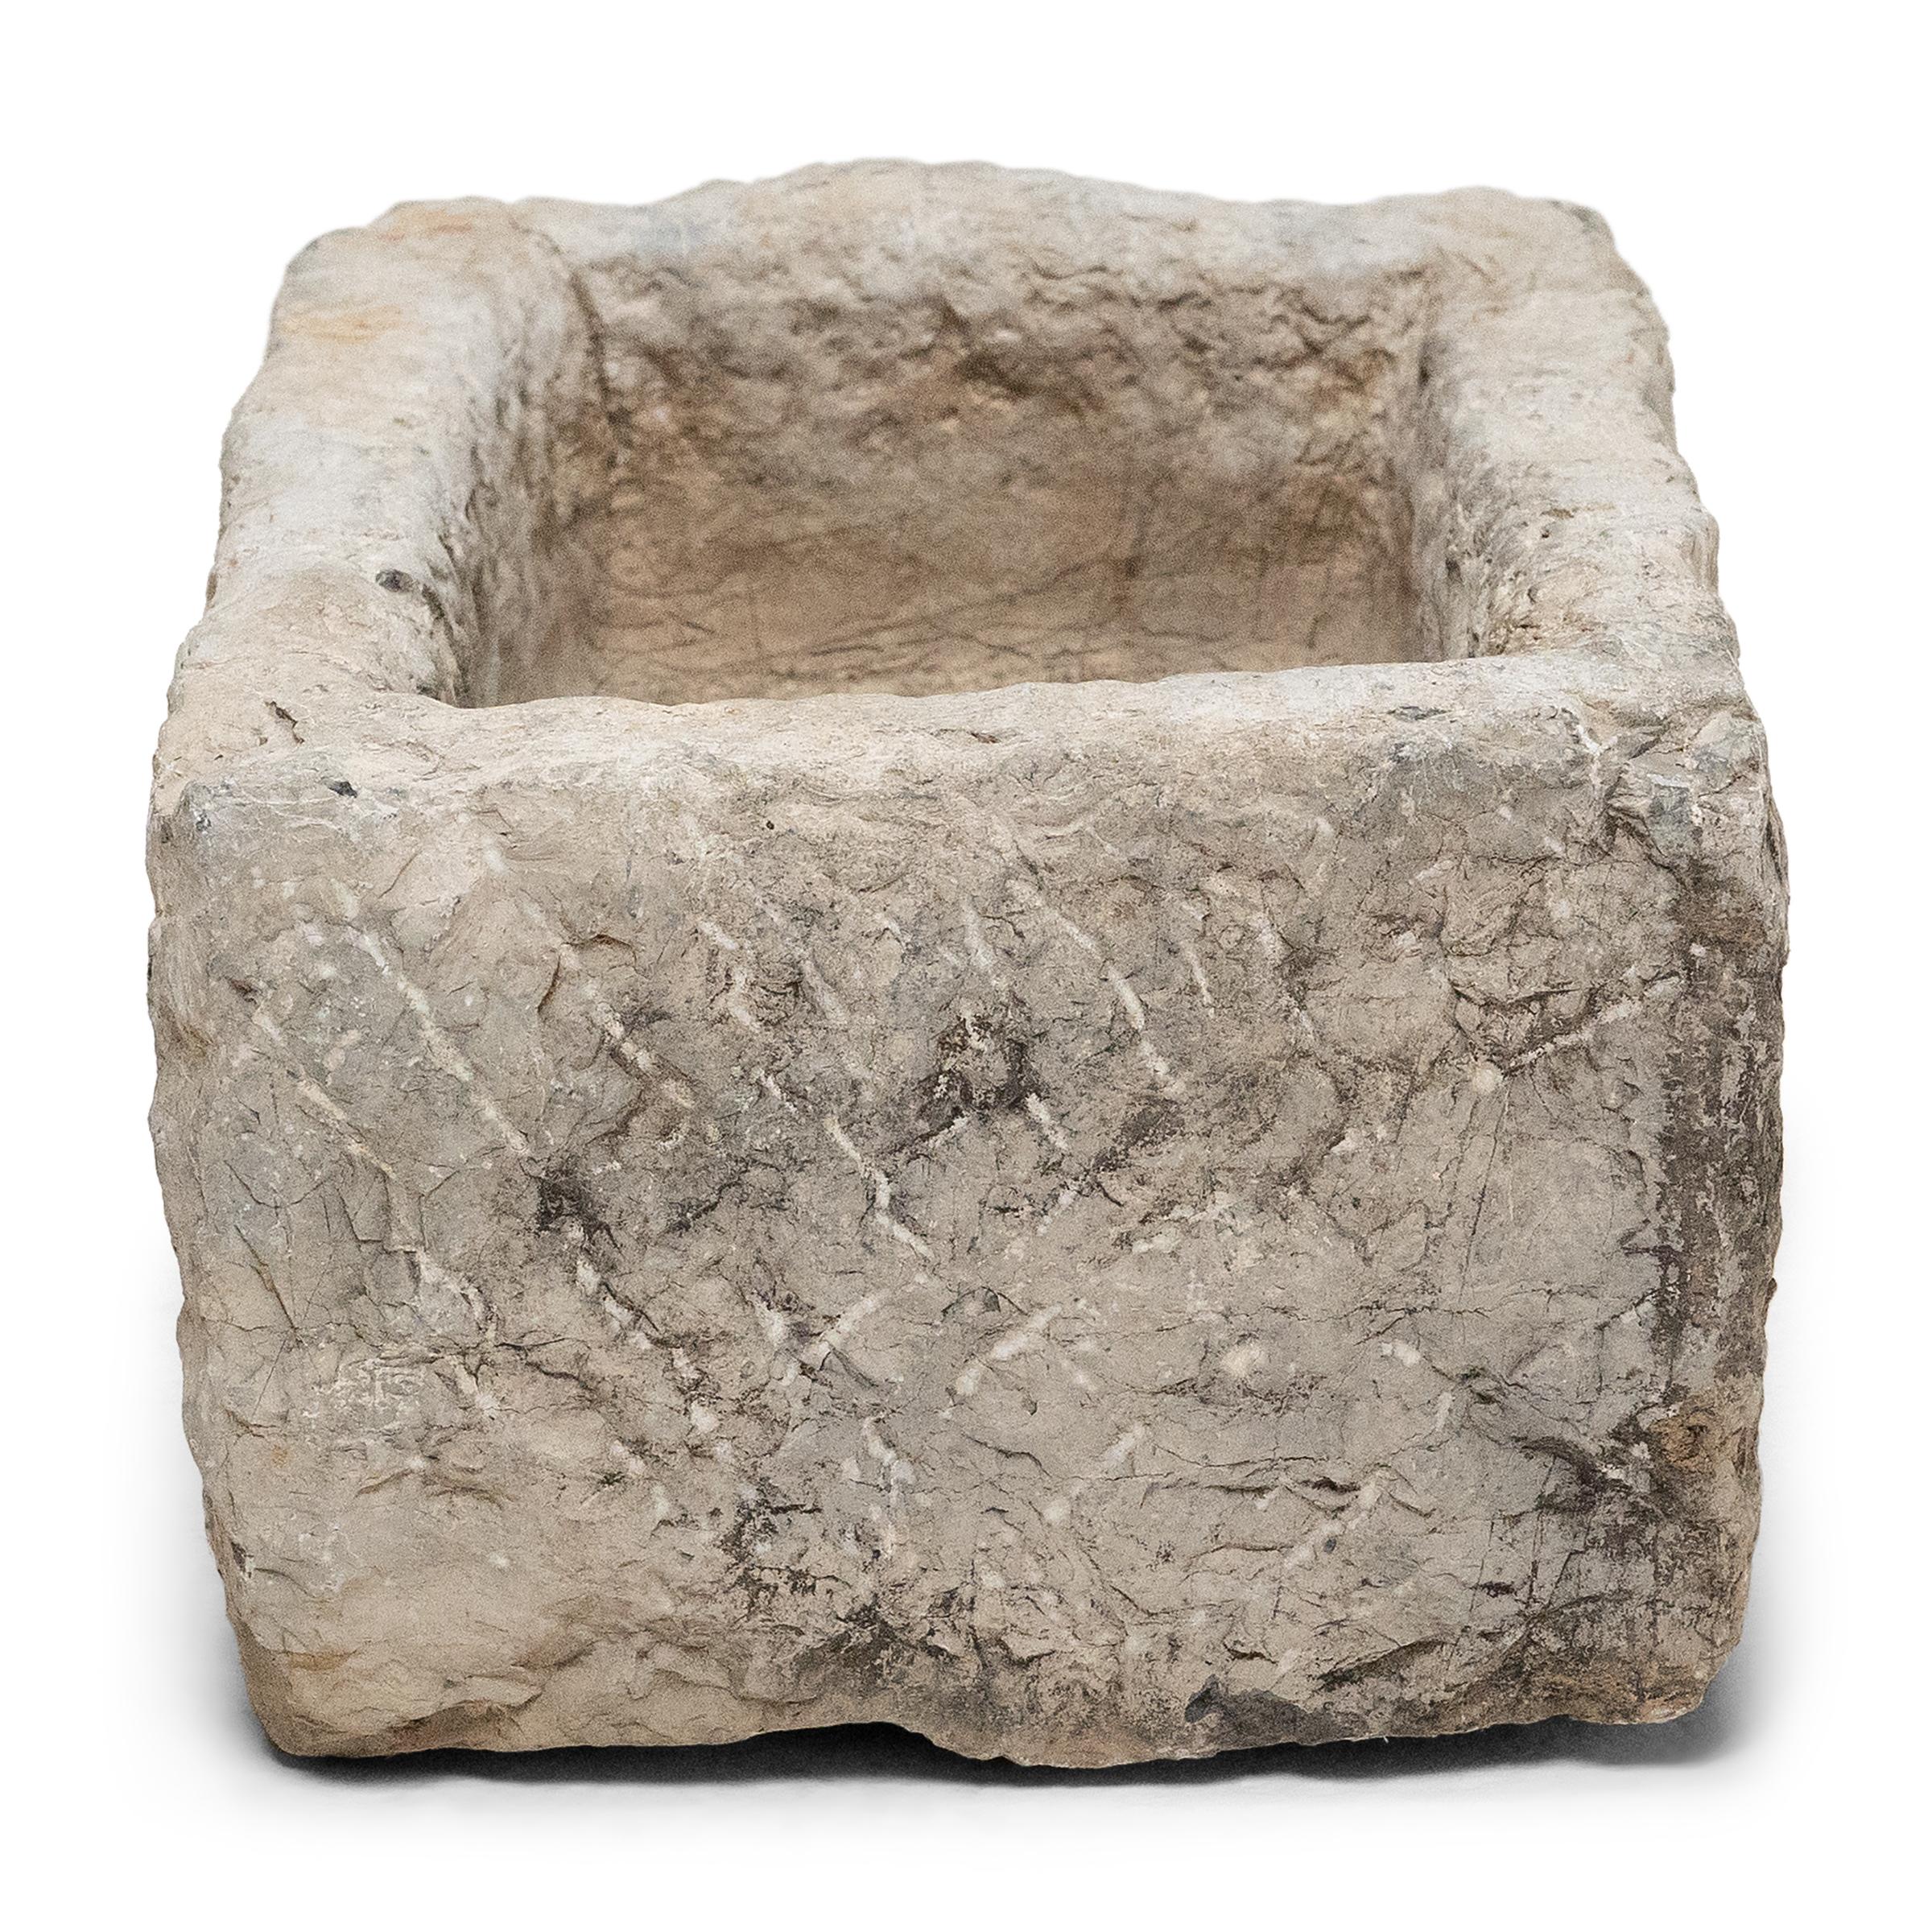 Once used on a provincial Chinese farm to hold water or animal feed, this early 19th-century stone trough is celebrated today for its organic form and rustic authenticity. The trough is hand-carved from solid limestone with a rectangular form,